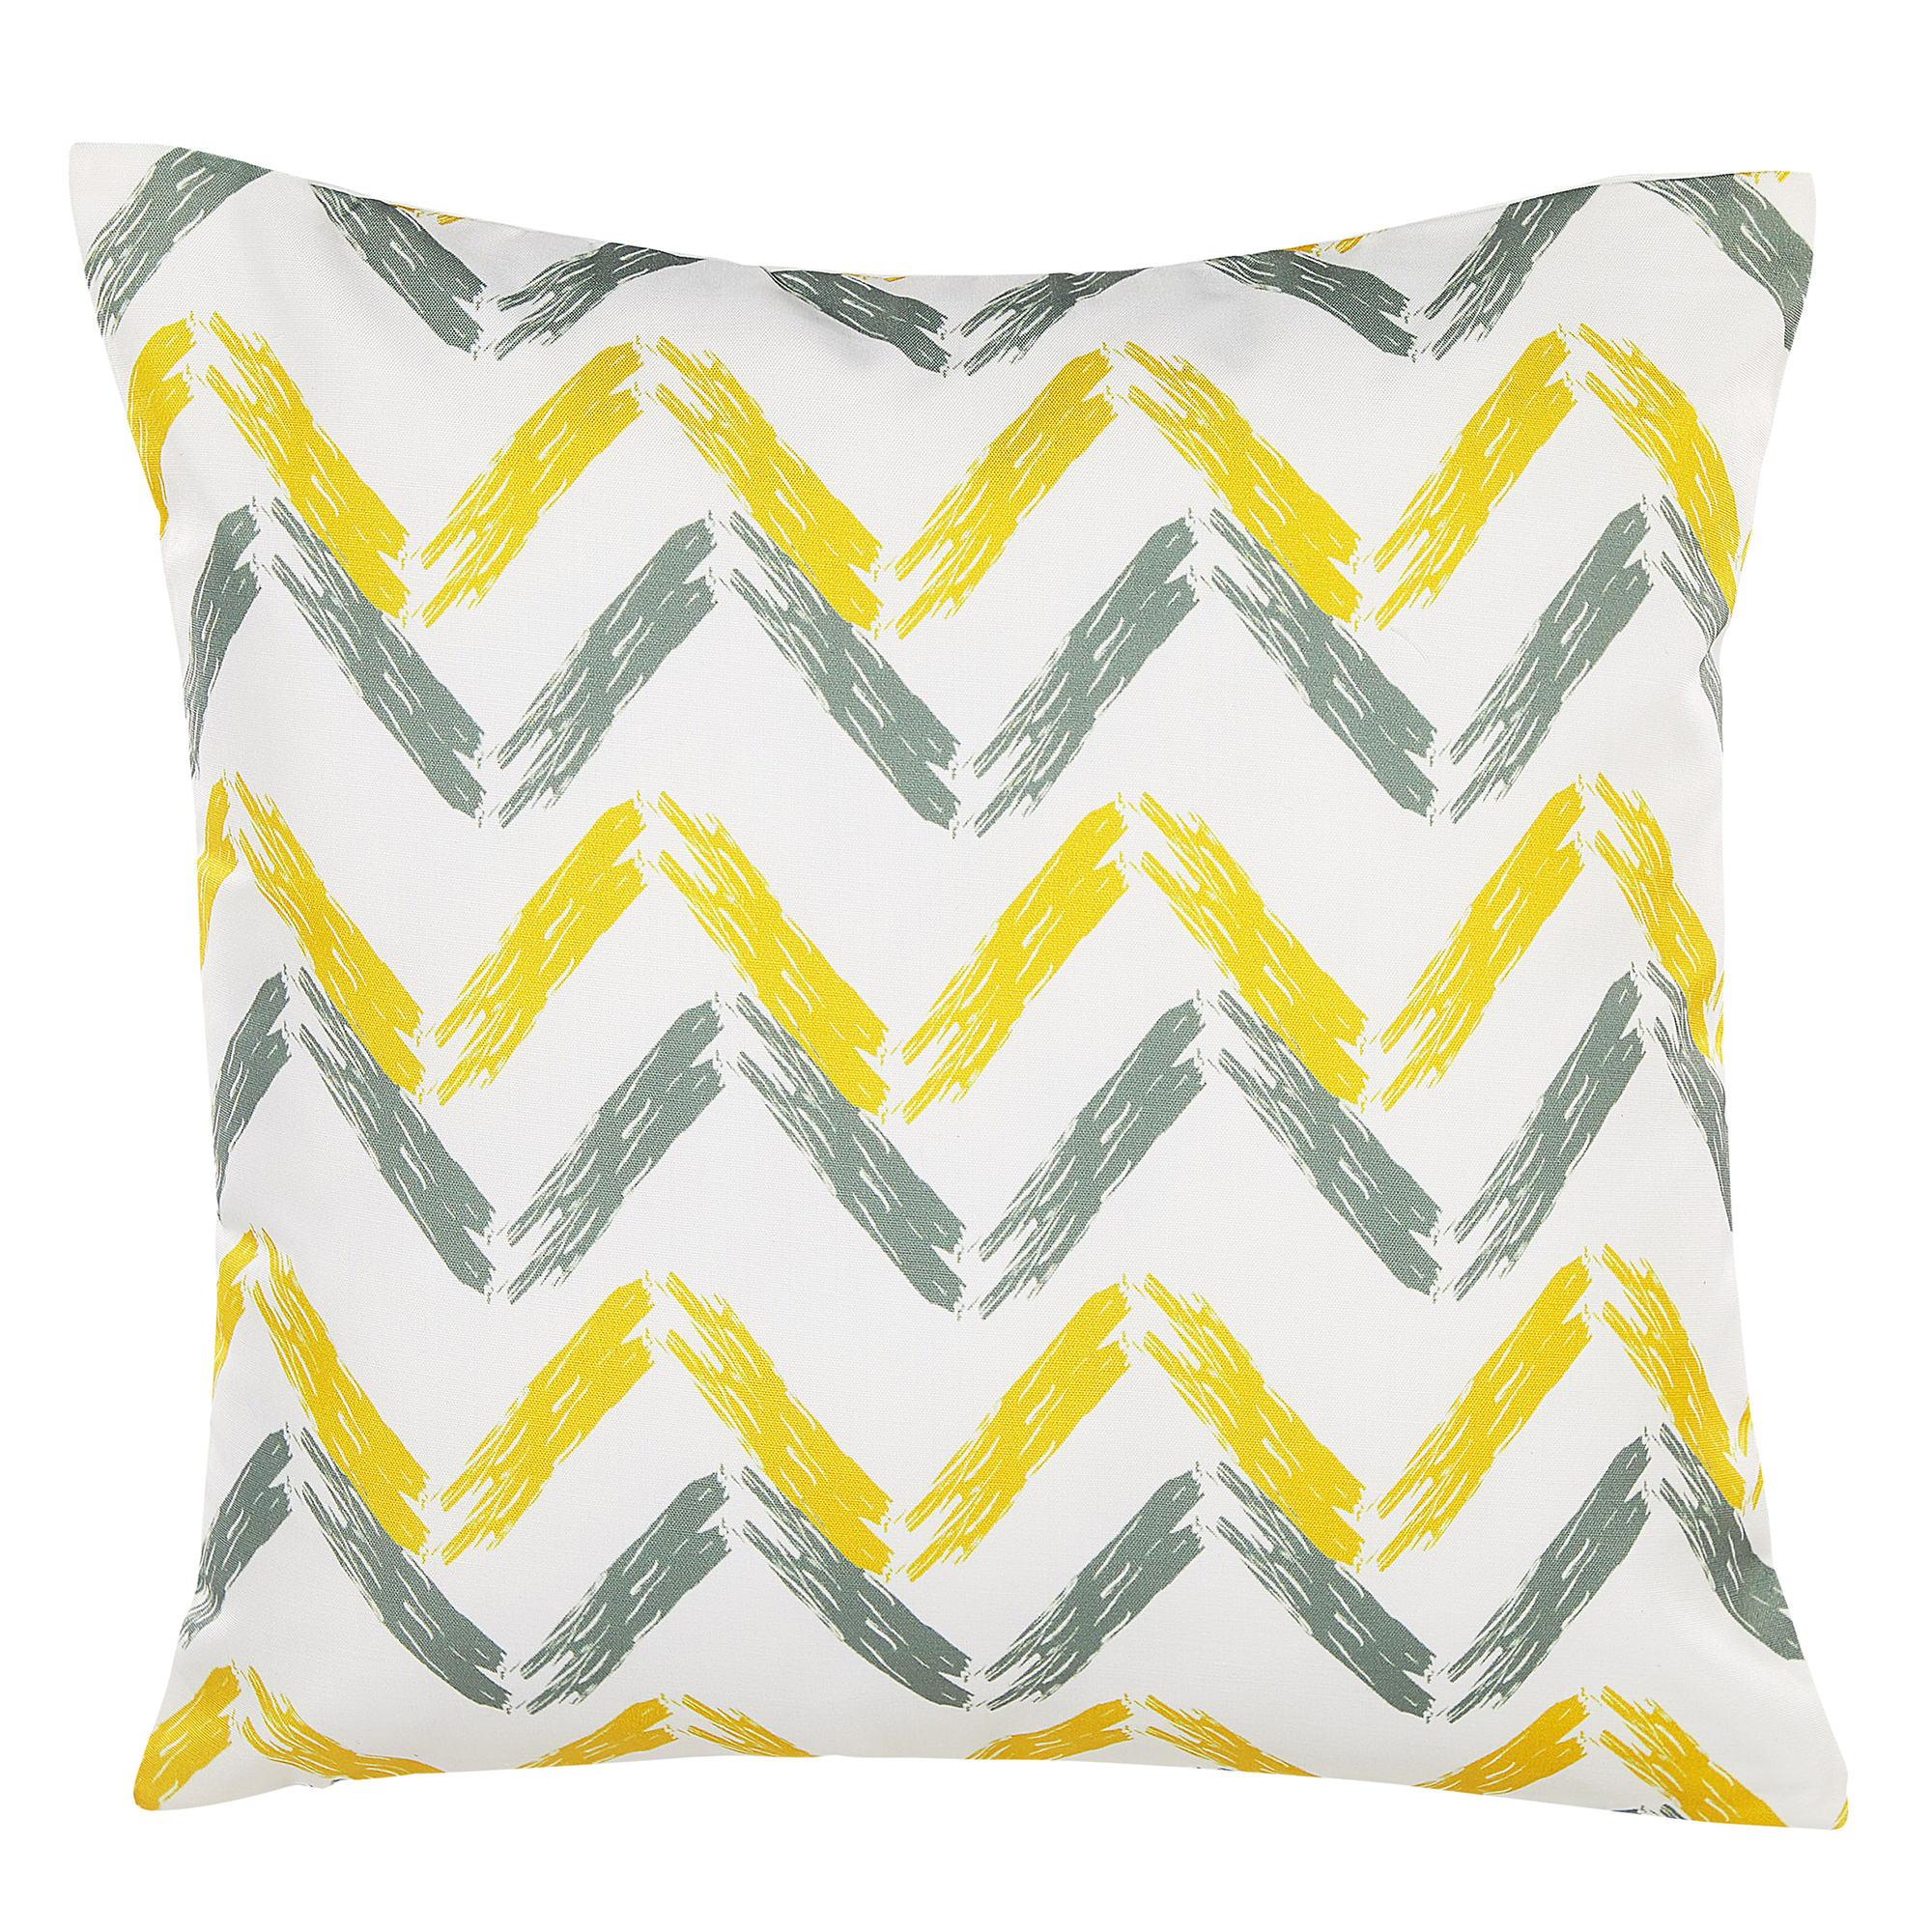 Beliani Garden Cushion Yellow and Grey Multicolour Polyester Chevron Pattern 45 x 45 cm Modern Outdoor Decoration Water Resistant